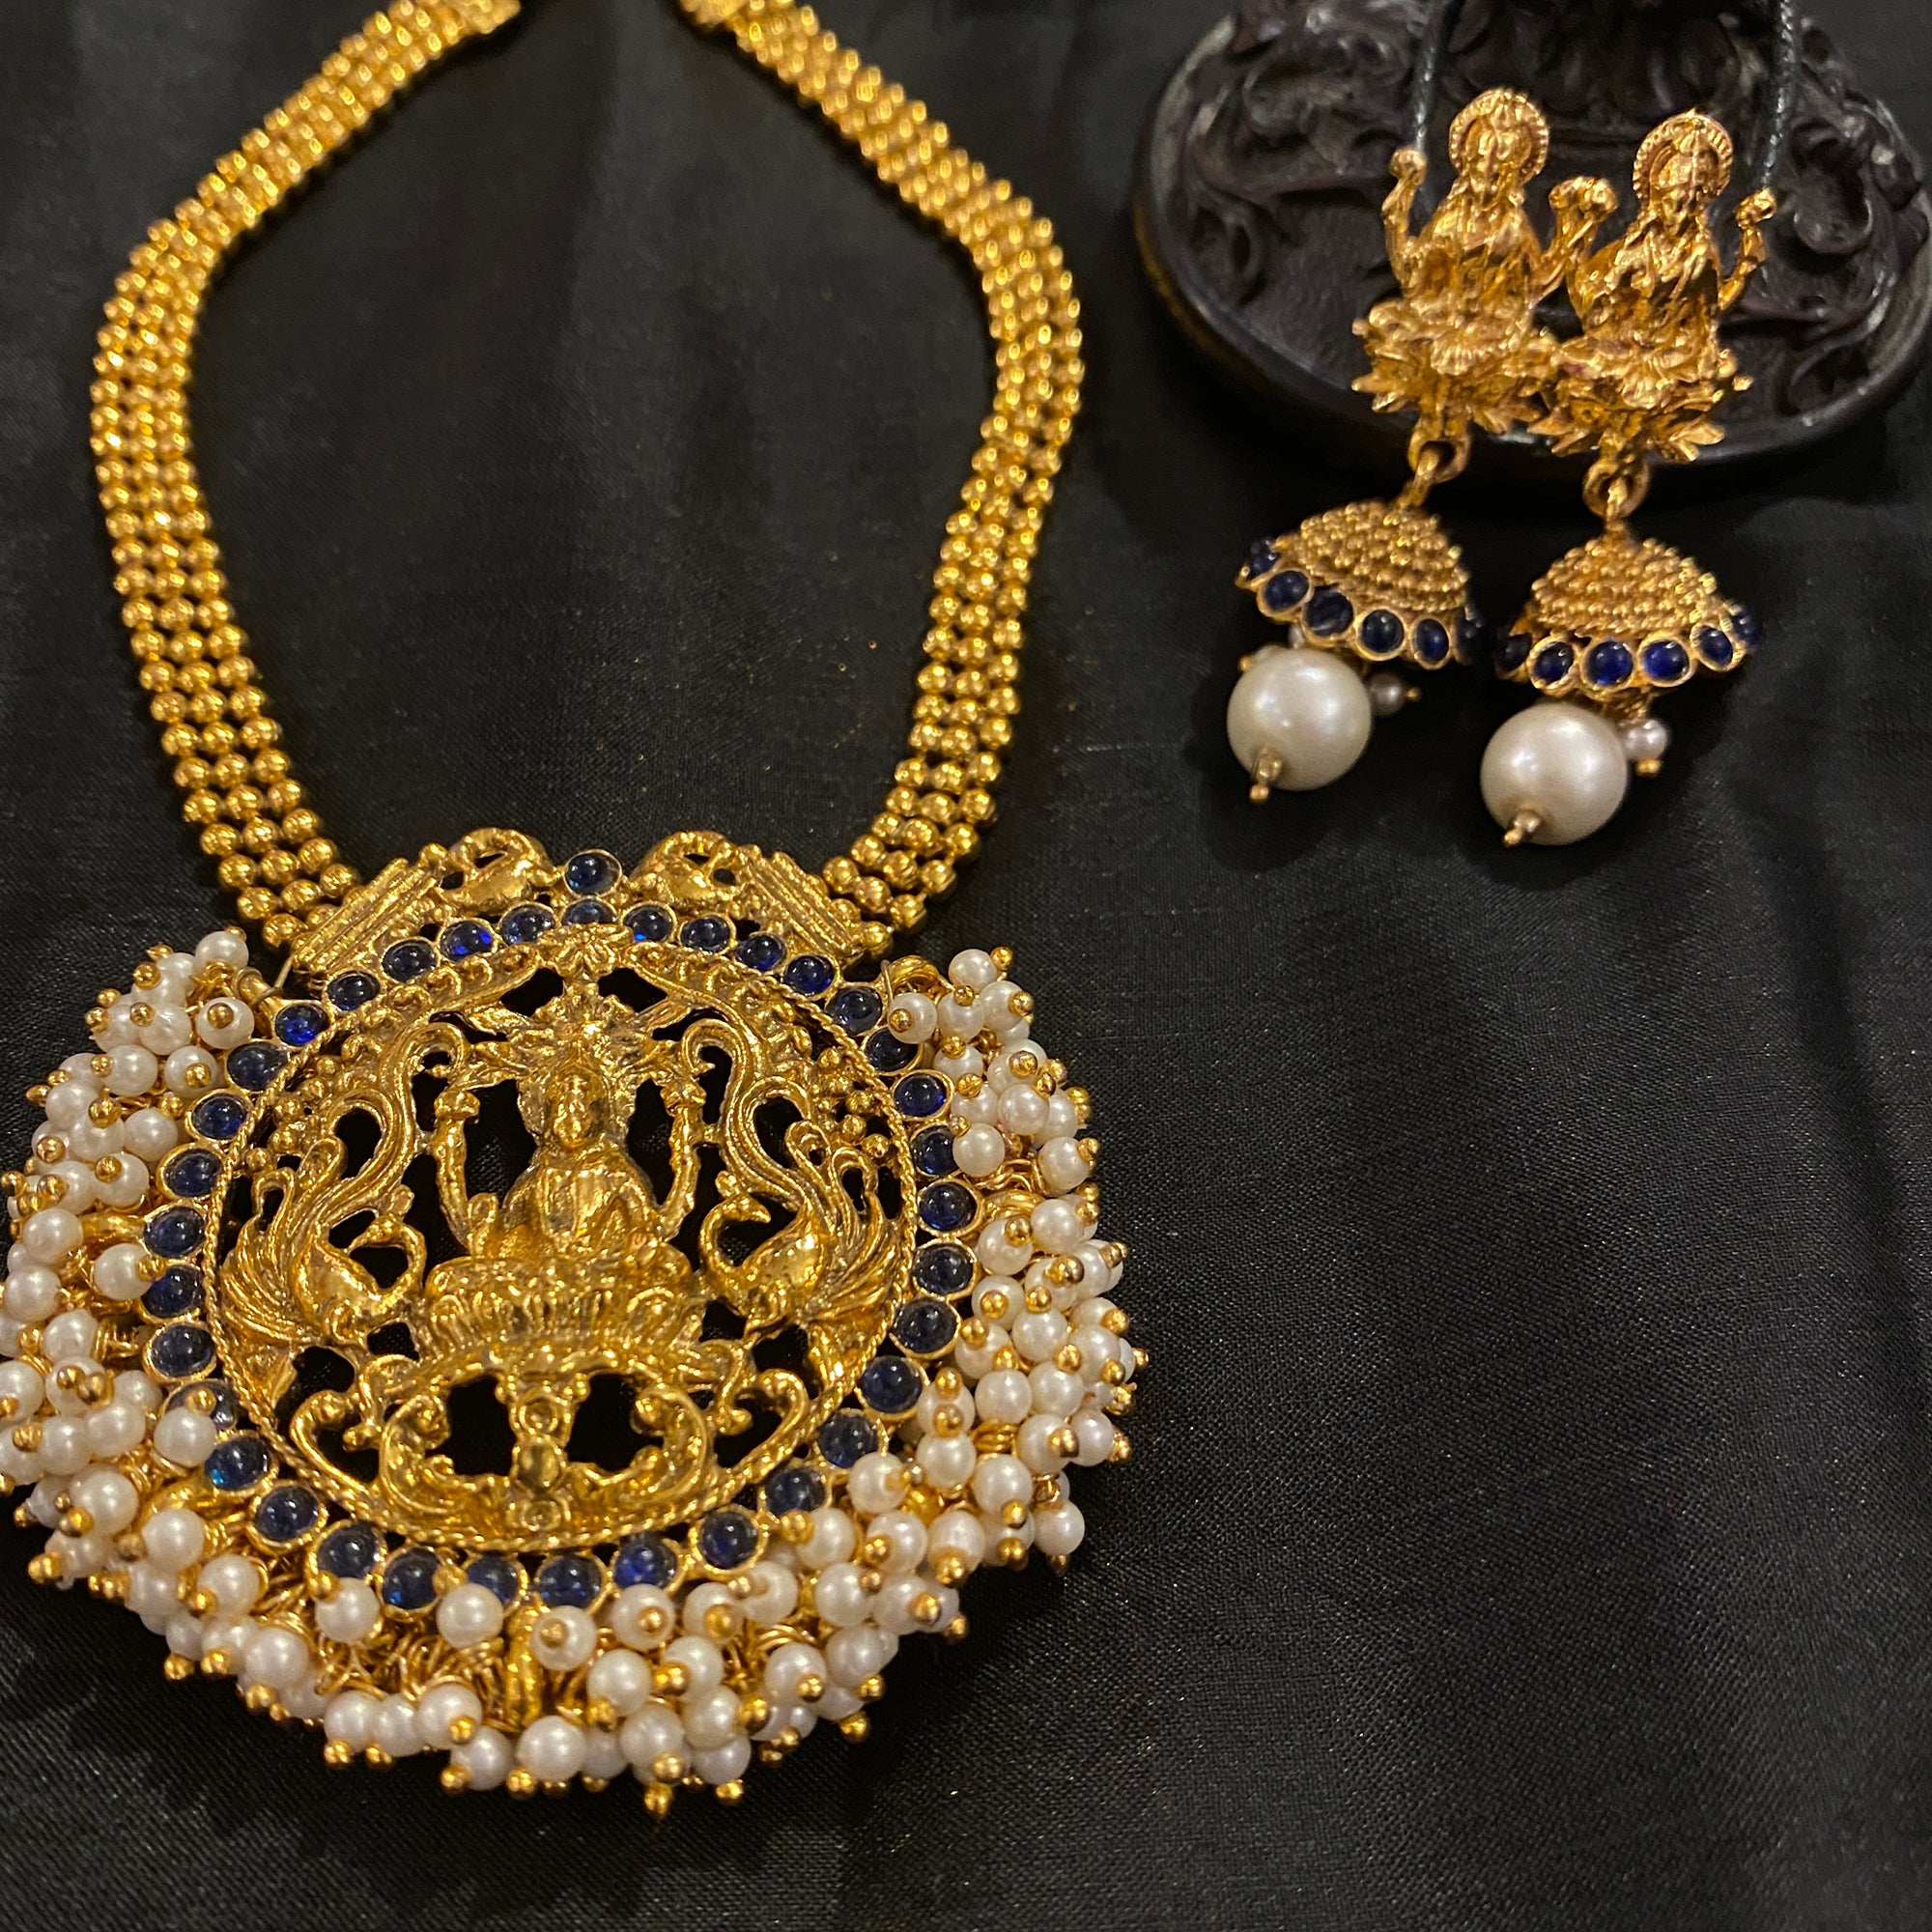 Temple Jewelry Necklace Set - Vintage India NYC